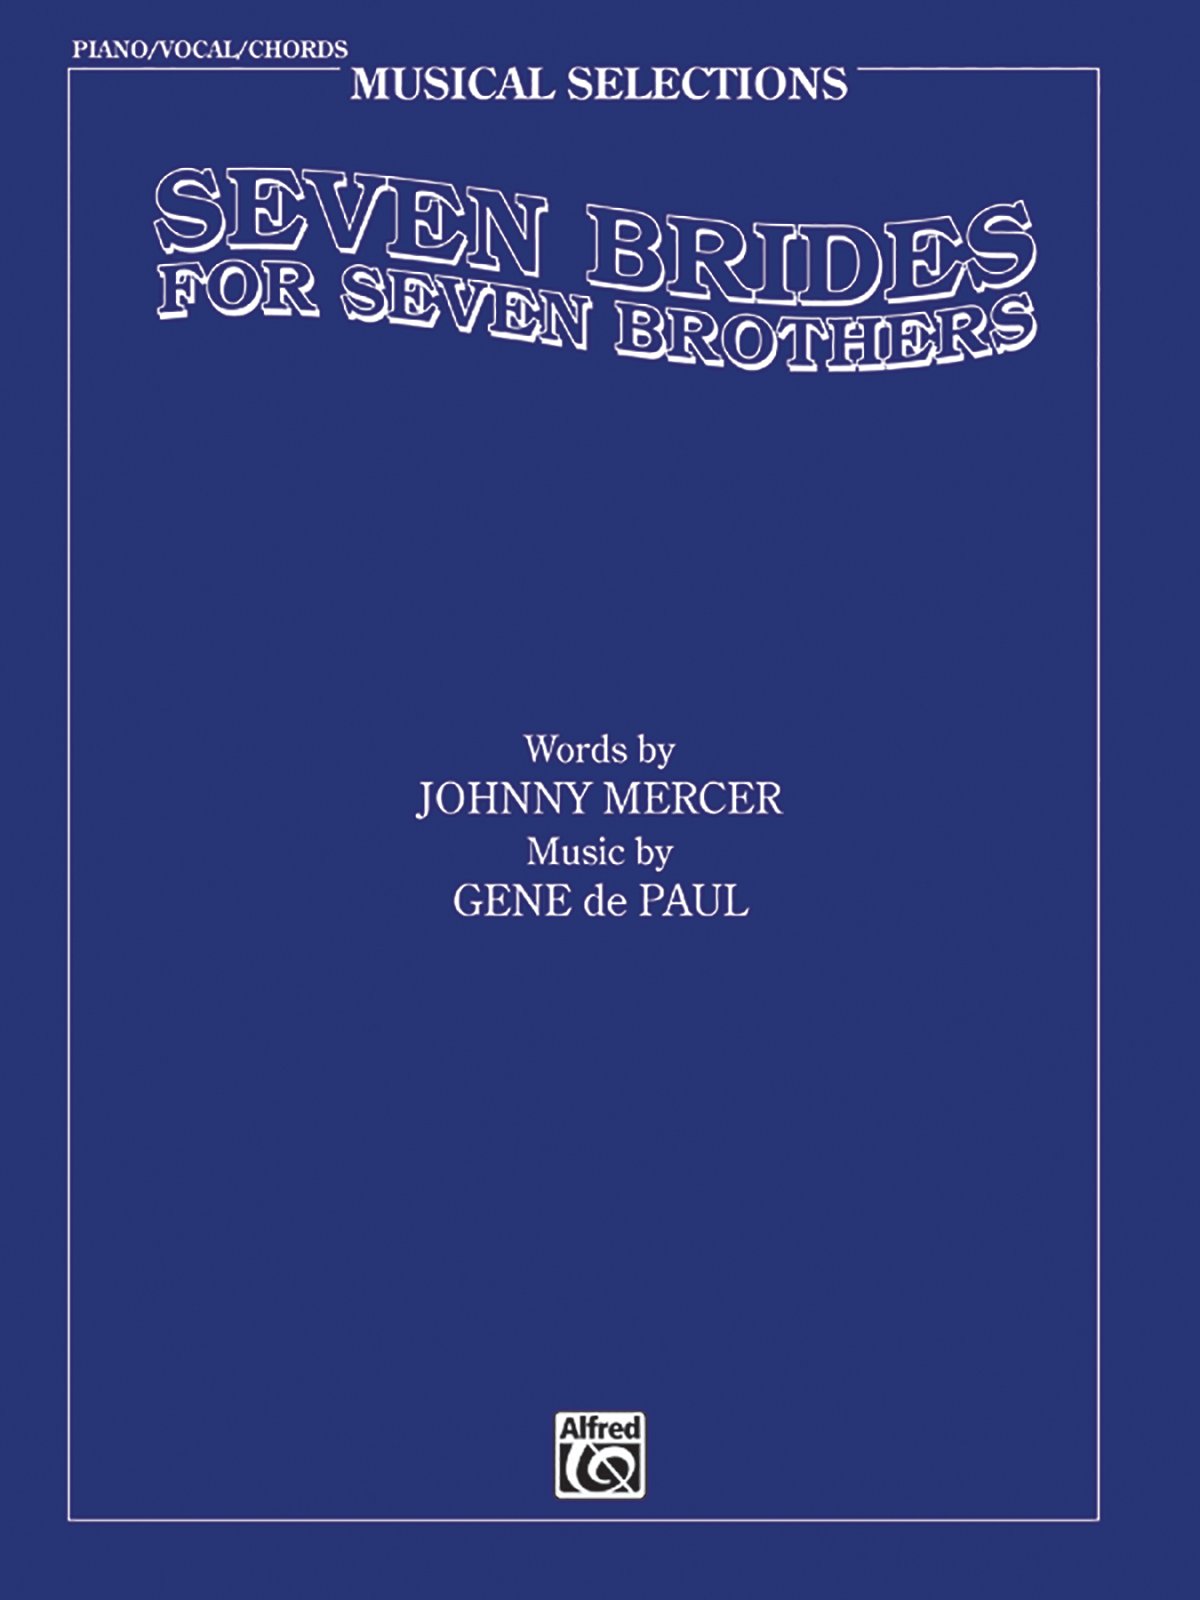 Seven Brides For Seven Brothers Vocal Selection Sheet Music Songbook